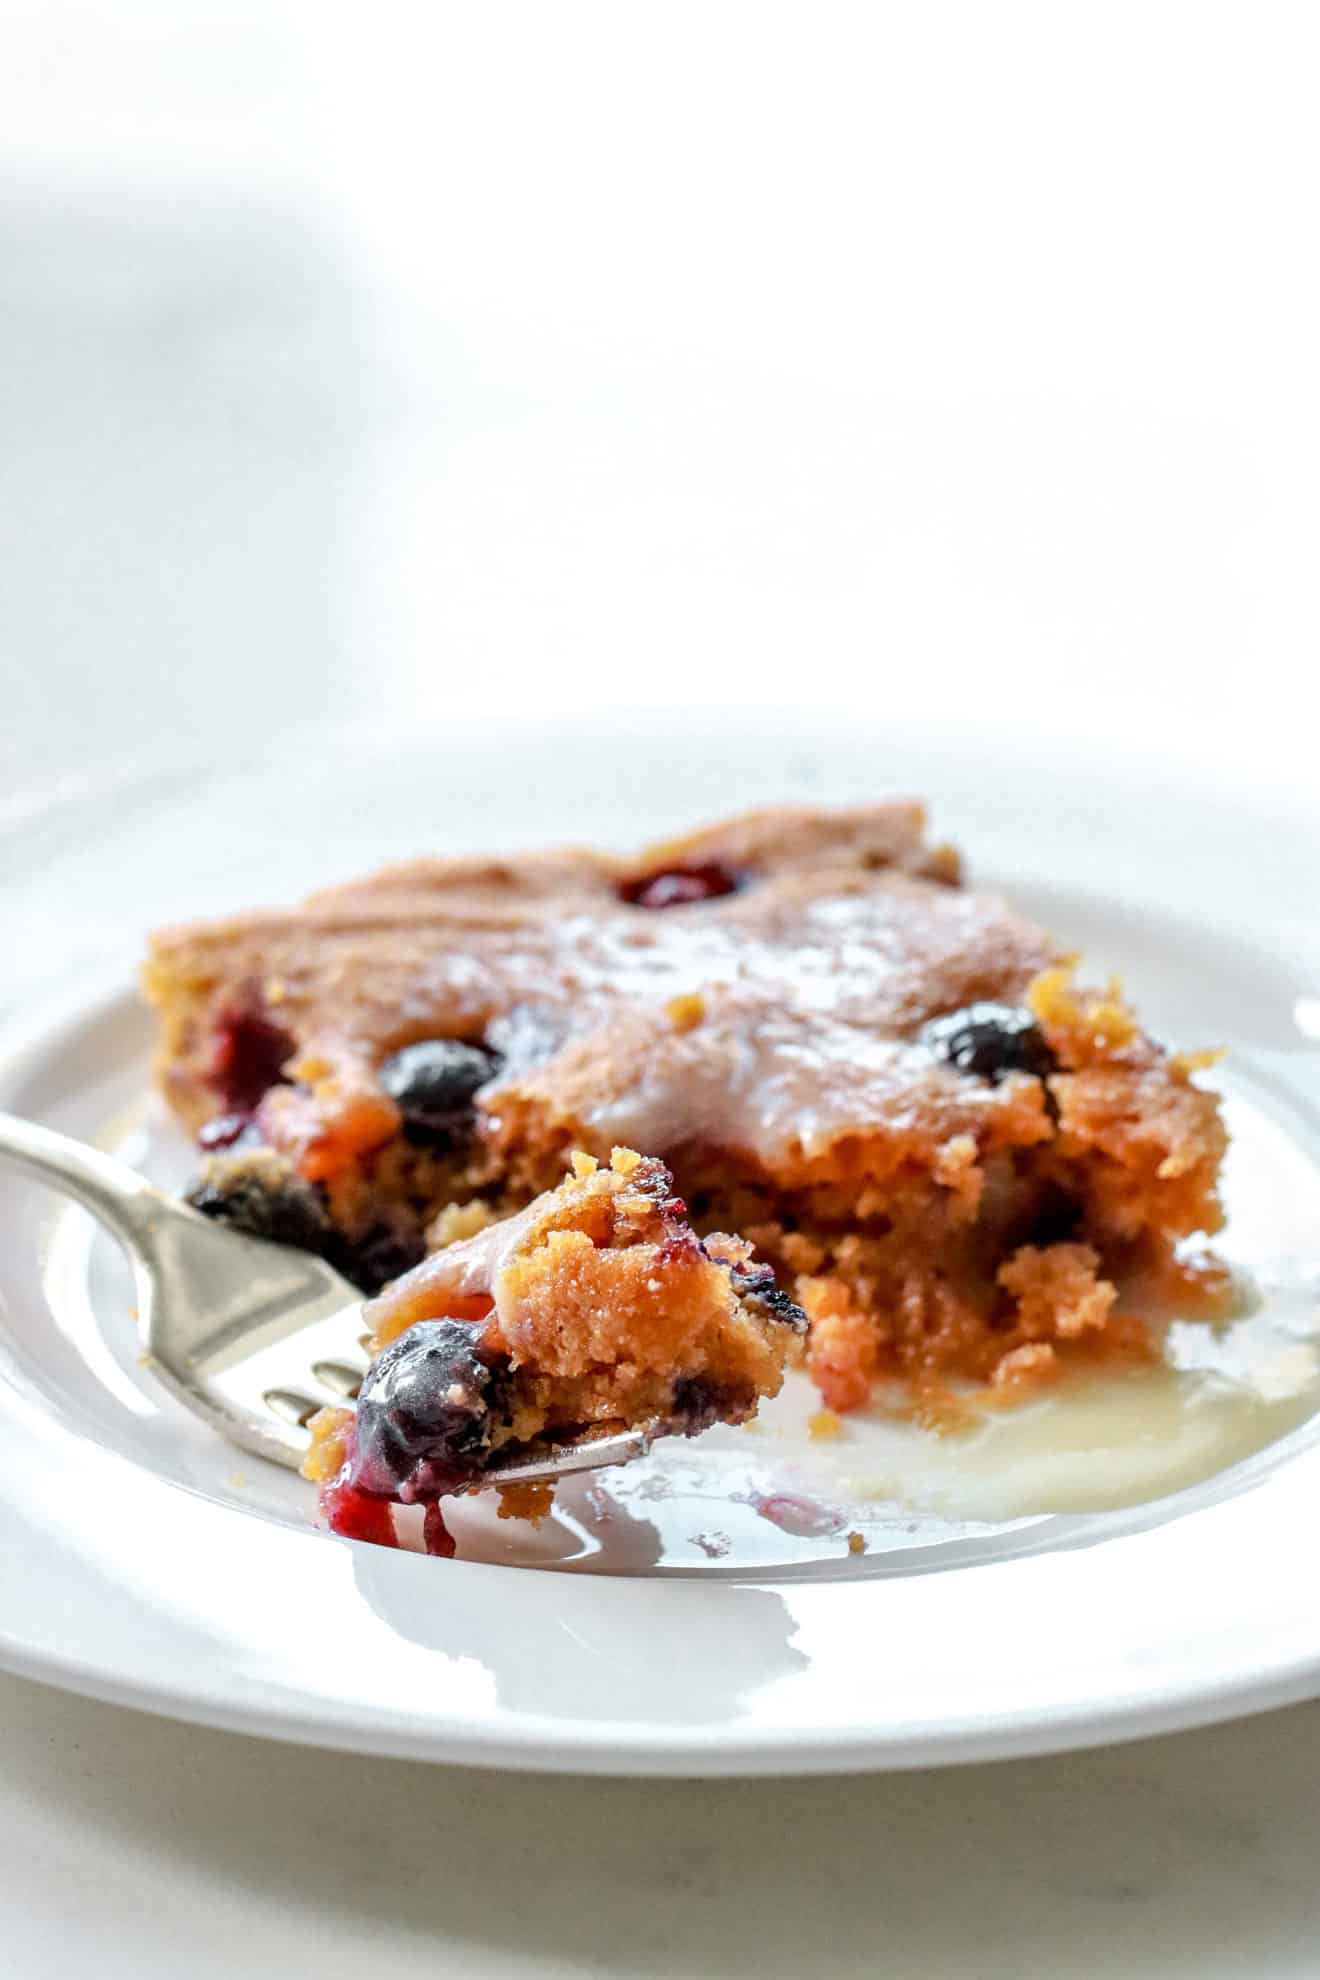 This is a vertical image of a square  cake with blueberries on top sitting on a white plate. The square cake is topped with a white glaze. A fork is coming in from the side and angled to lean on the center of the plate with a bite taken out of it. The image mainly focuses on the bite on the fork. 